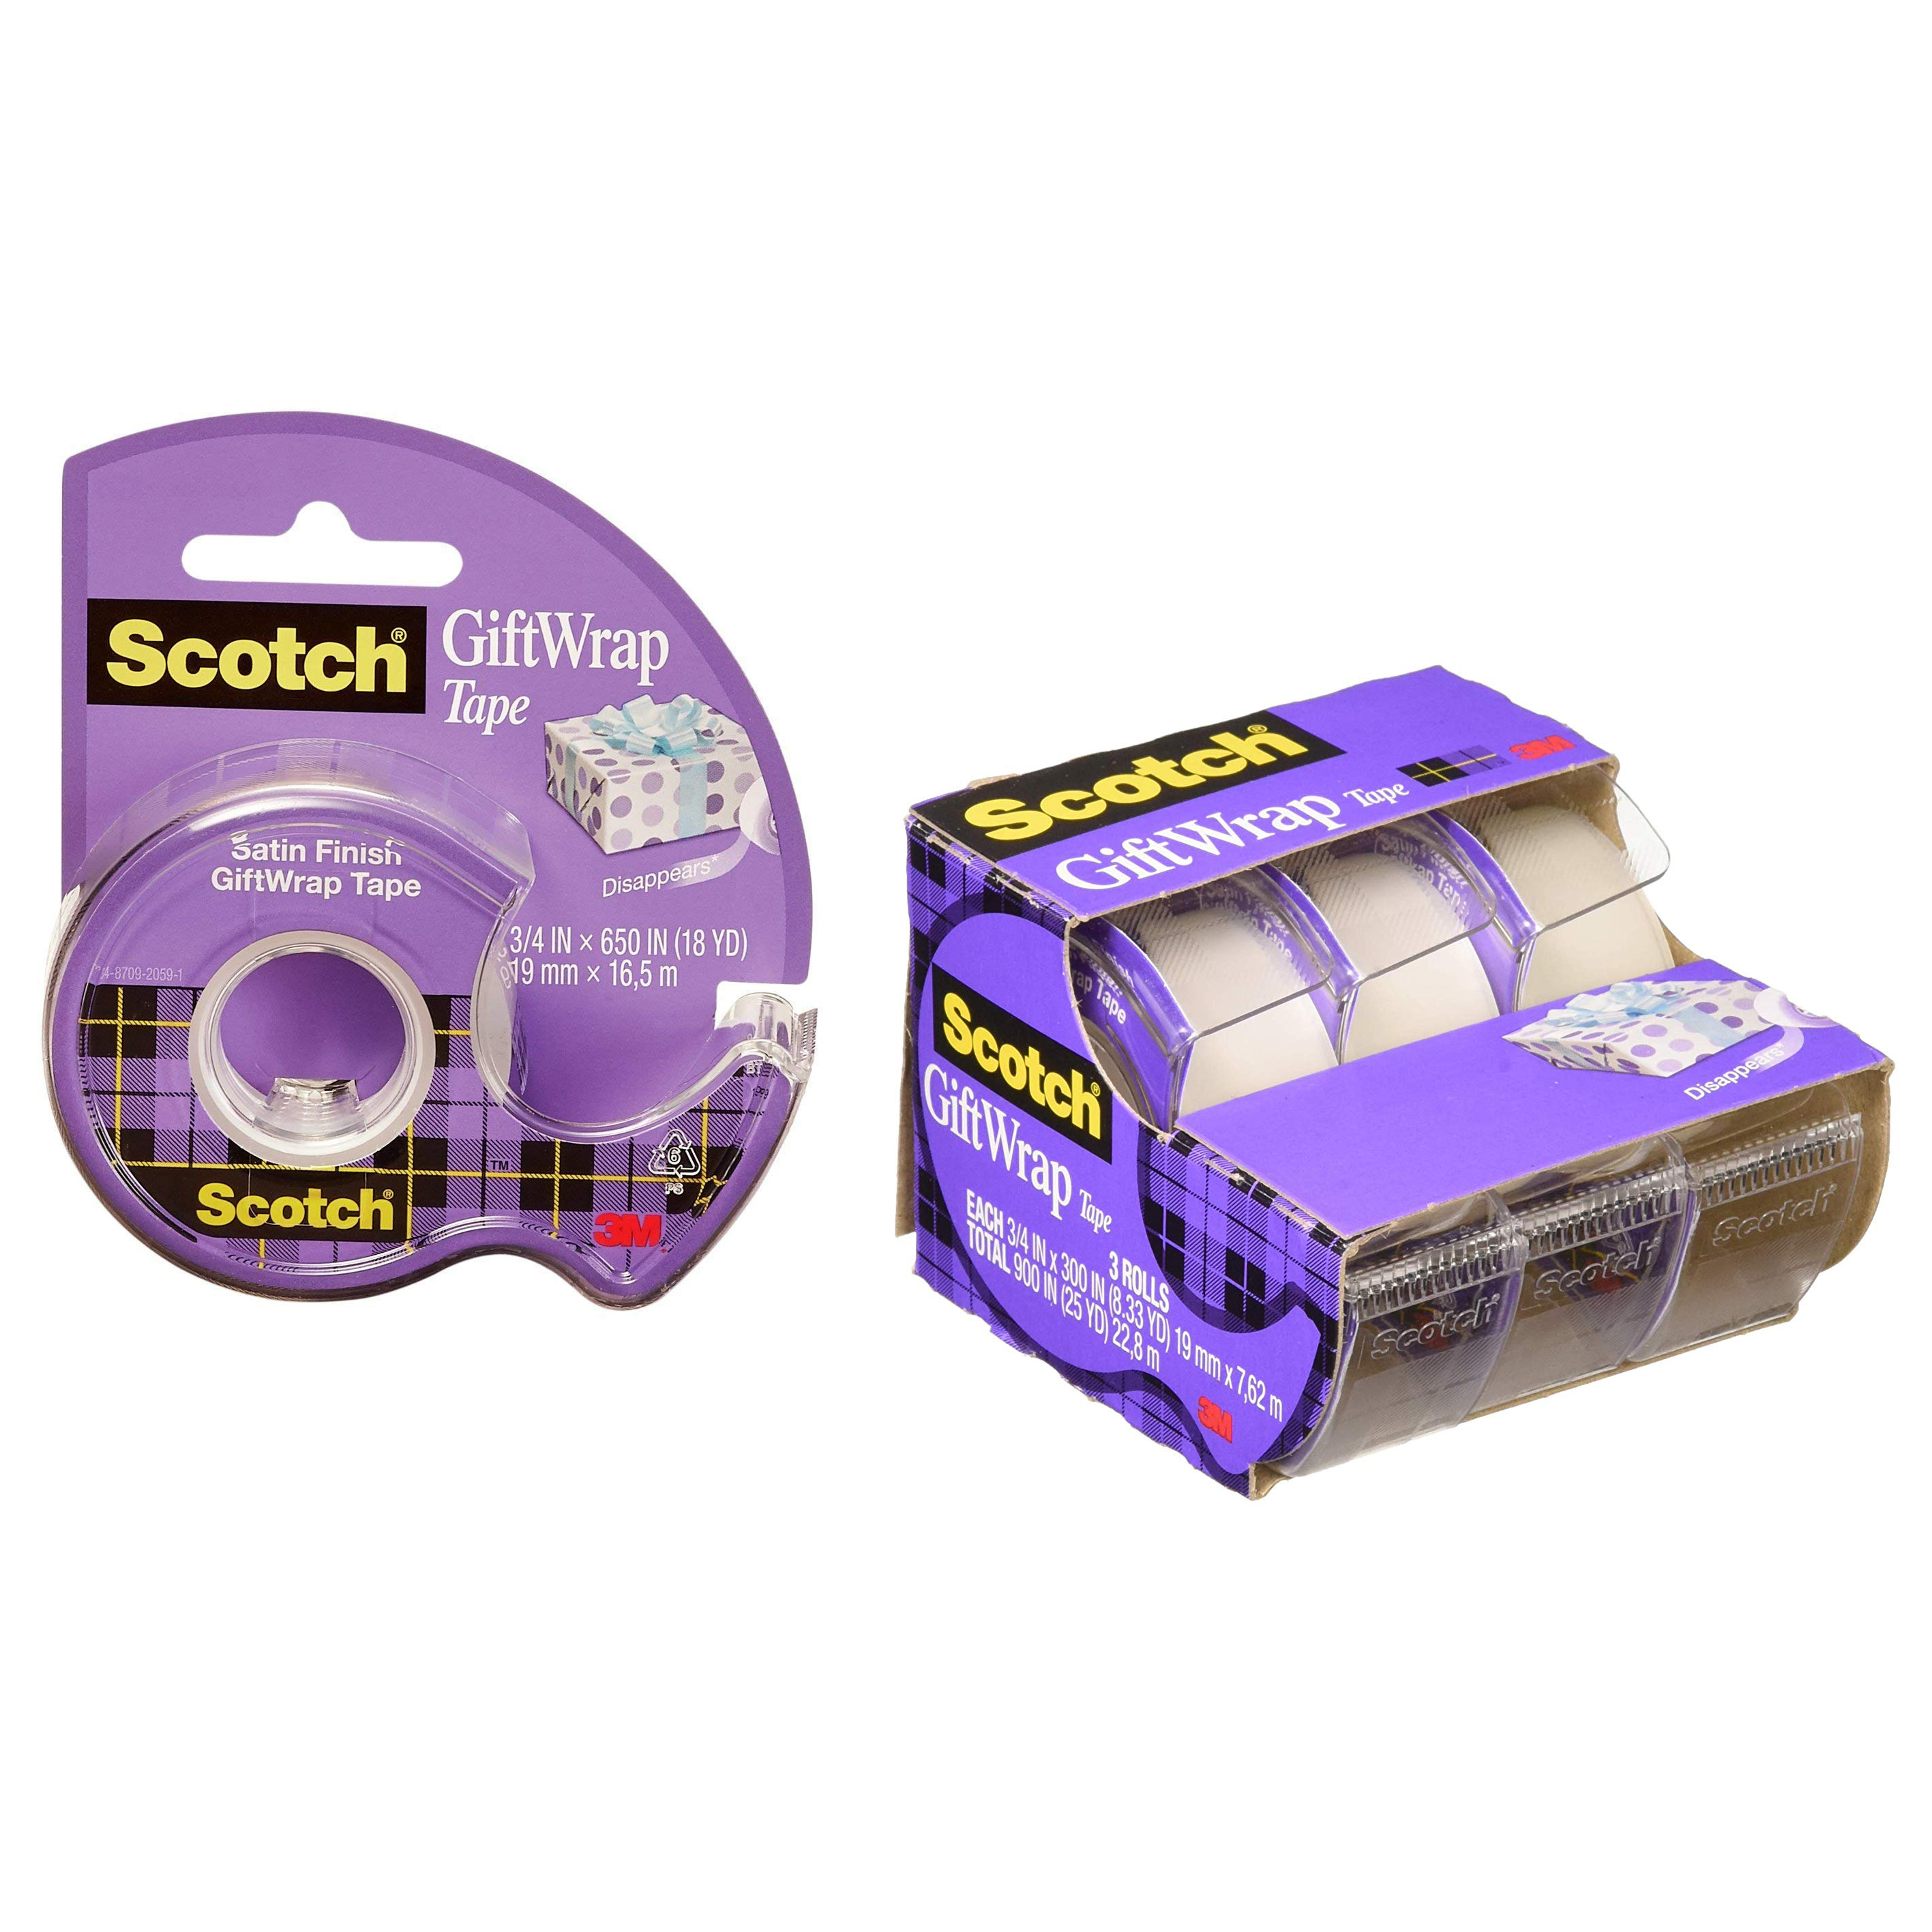 Engineered for Repairing 810K2 Numerous Applications Boxed Scotch Brand Magic Tape 3/4 x 1000 Inches 2 Rolls Pack 2 Great for Gift Wrapping 